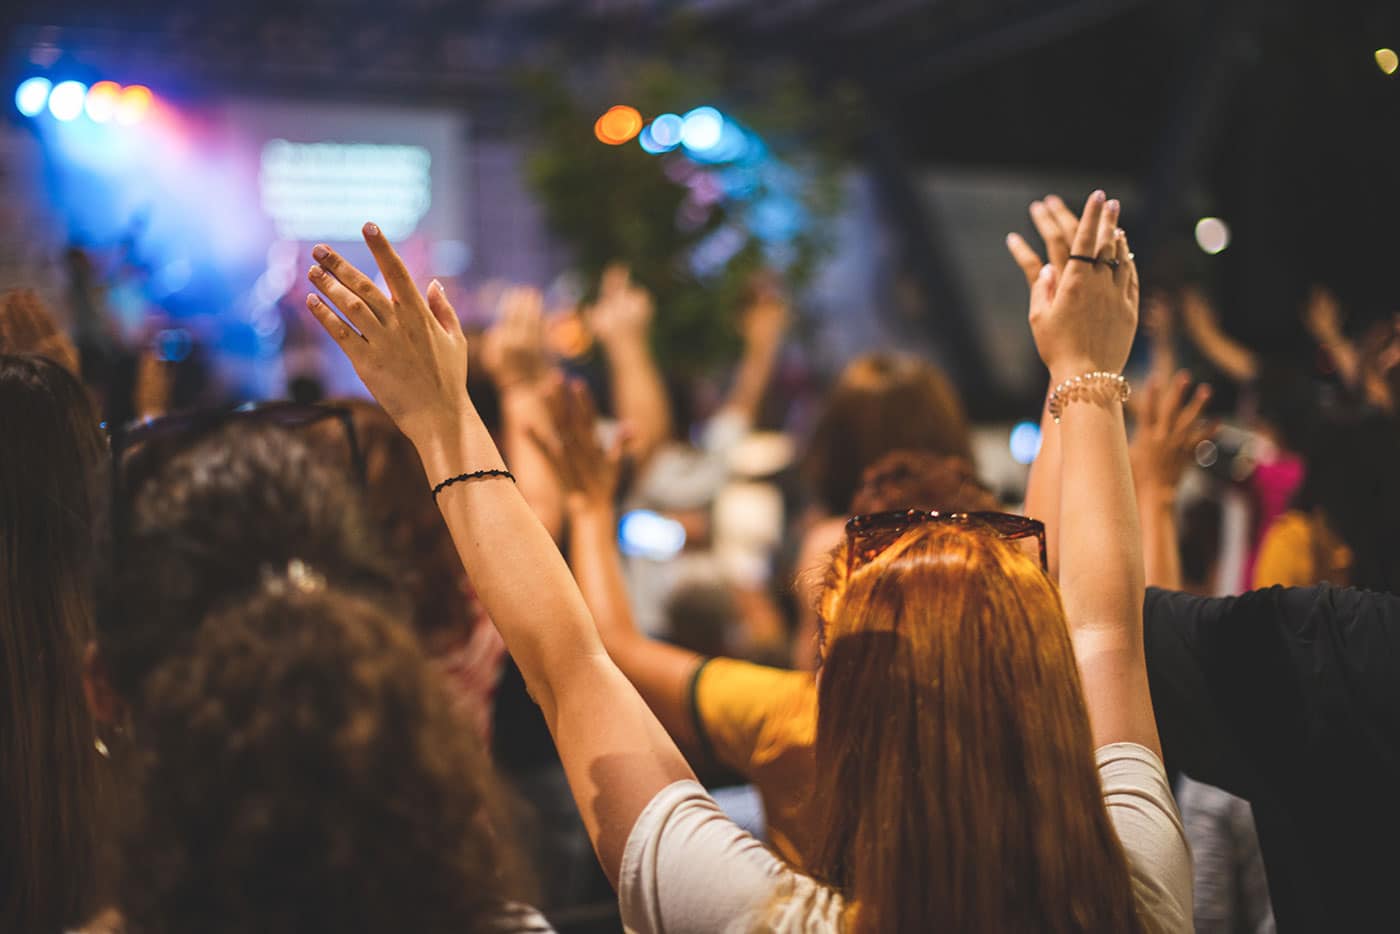 Hands raised during worship service